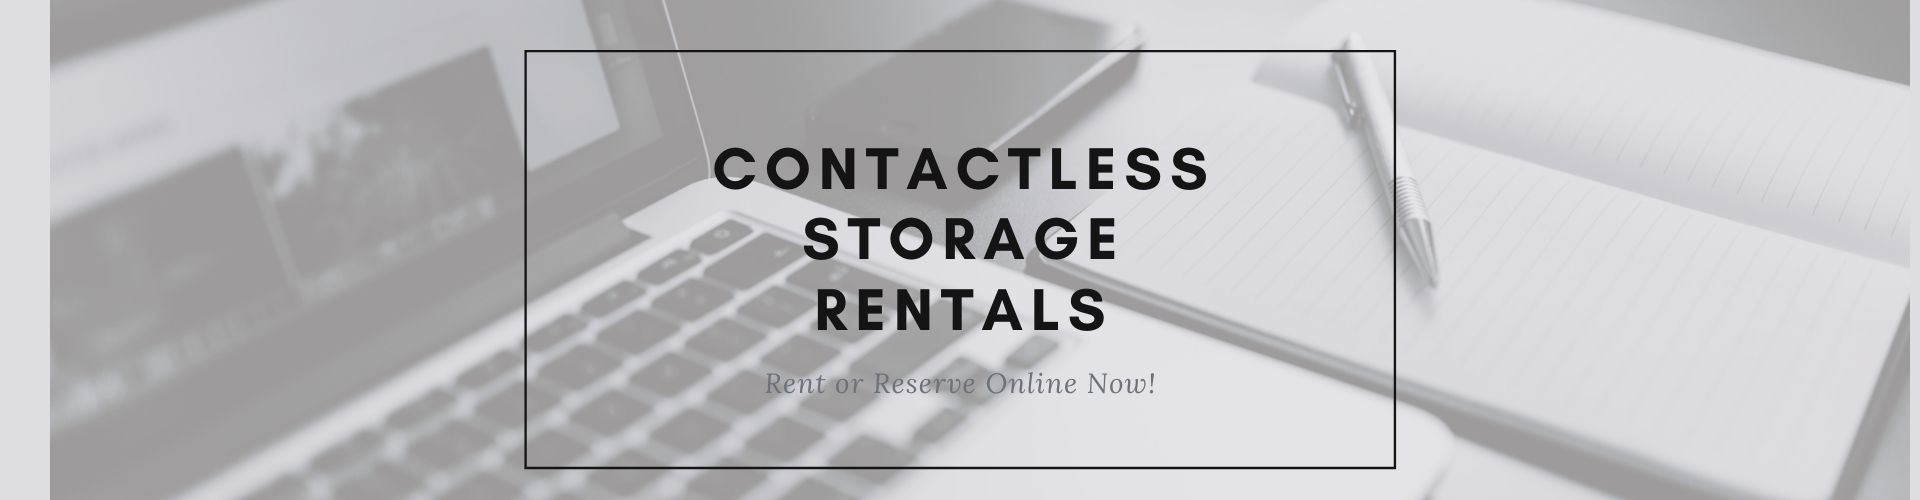 contactless storage rentals in Driggs and Victor ID